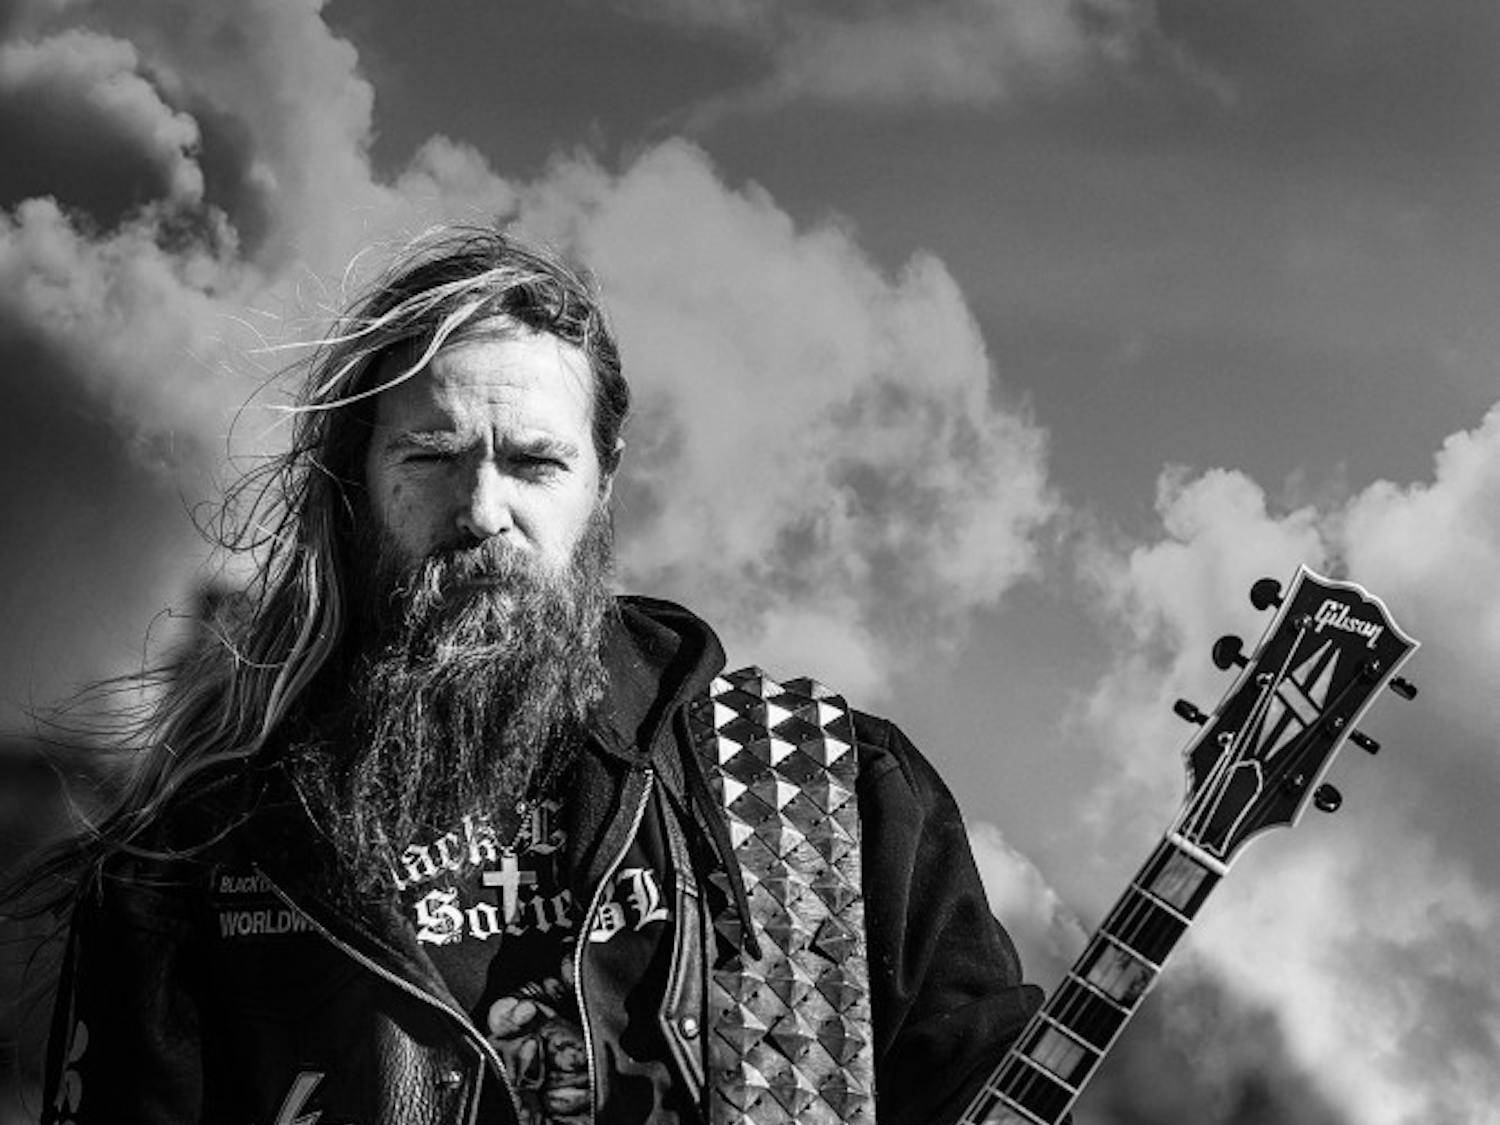 	Zakk Wylde and his band, Black Label Society, performed at Albuquerque’s Sunshine Theater on Aug. 4.